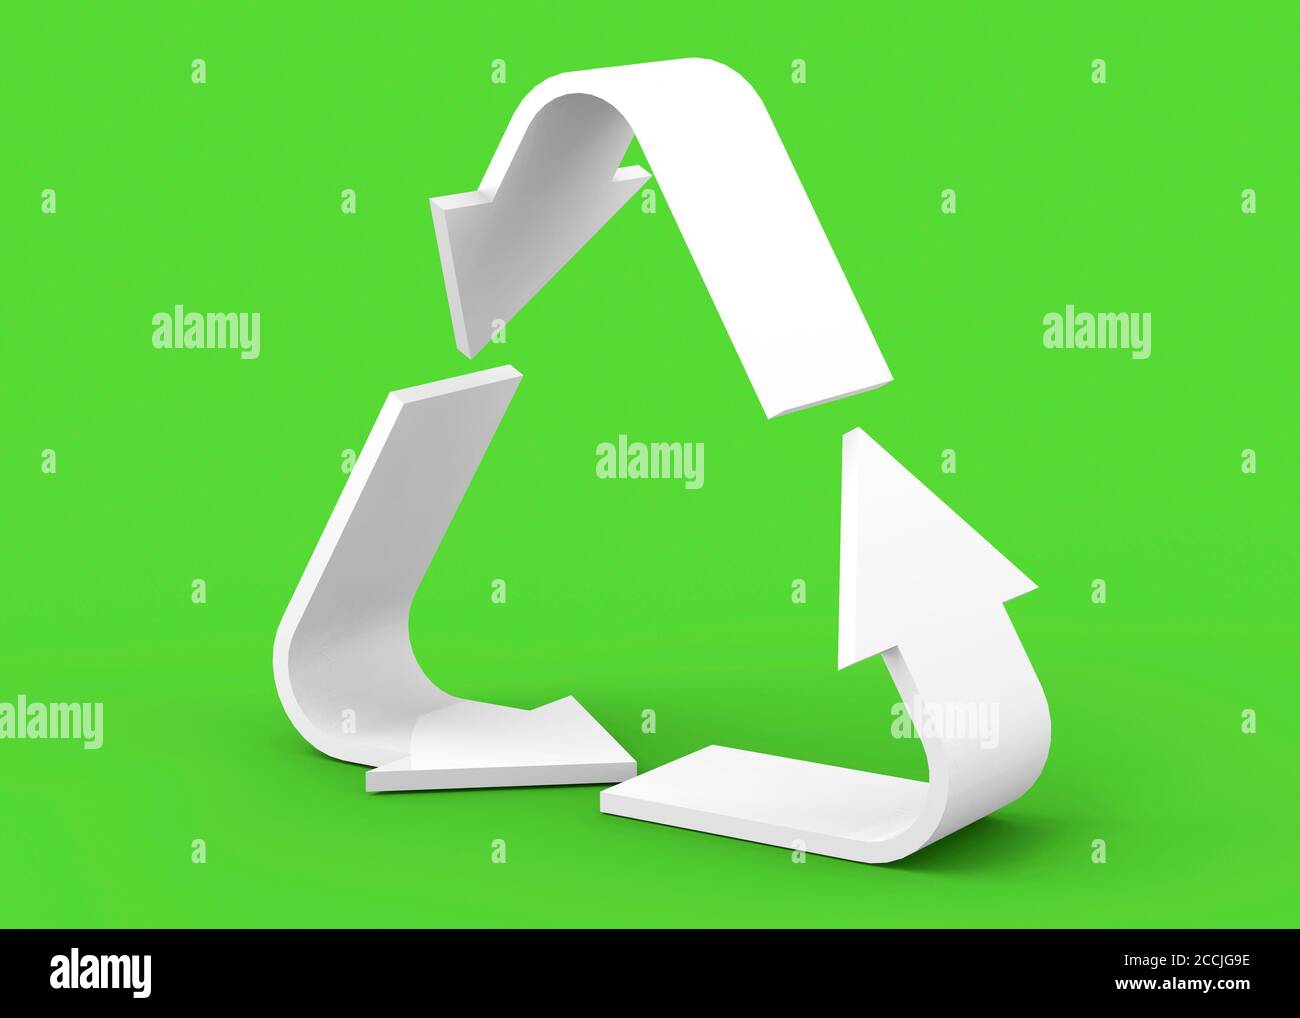 The Recycle Icon - 3D Stock Photo